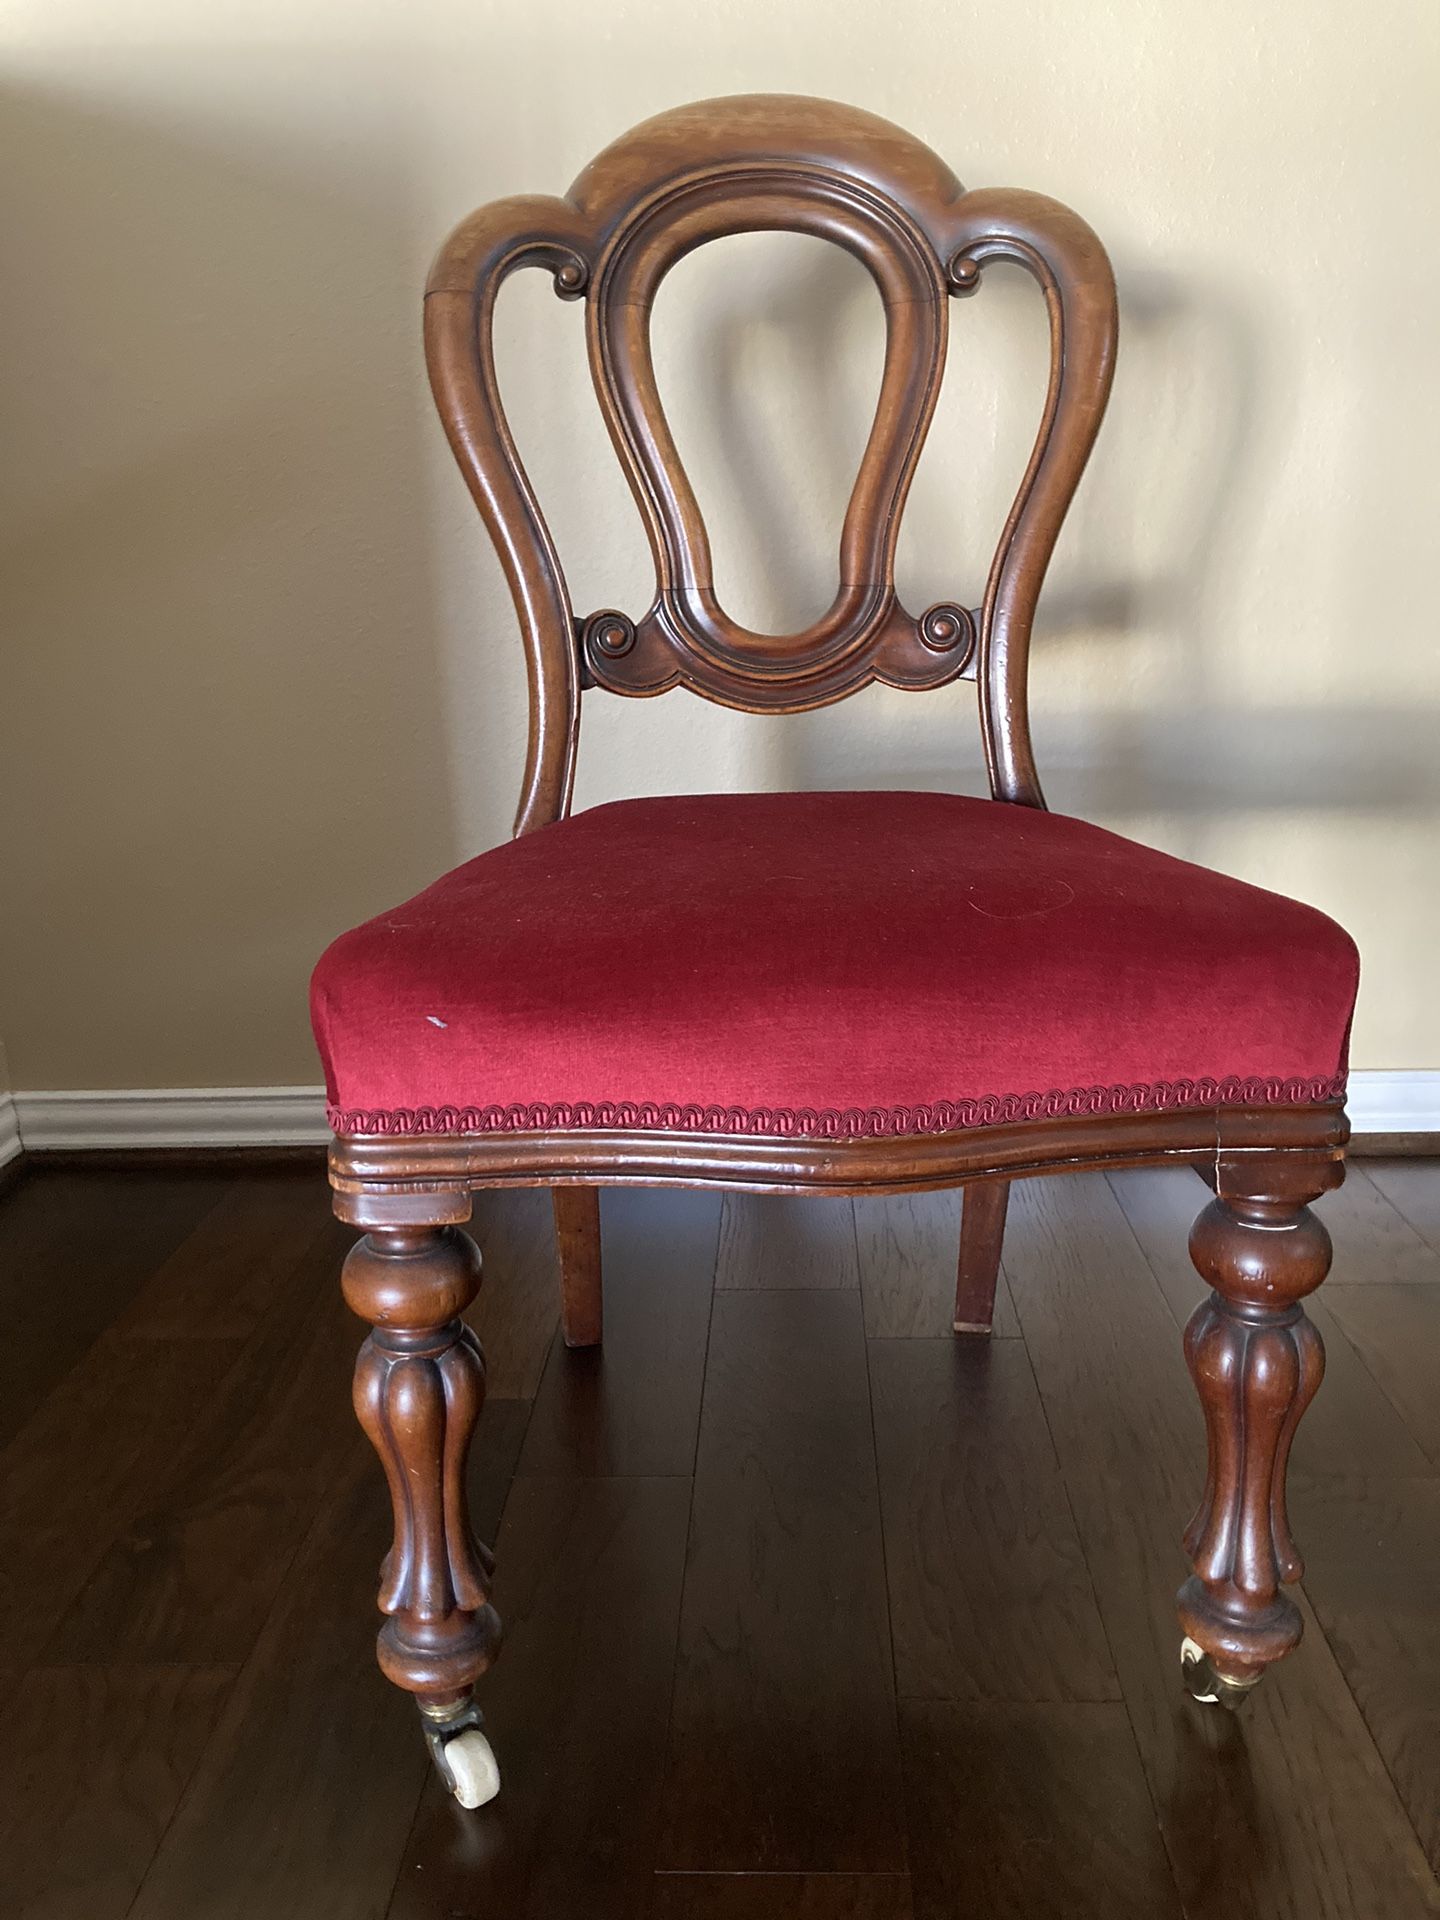 Six Antique Dining Room Chairs (from England) - MUST SELL